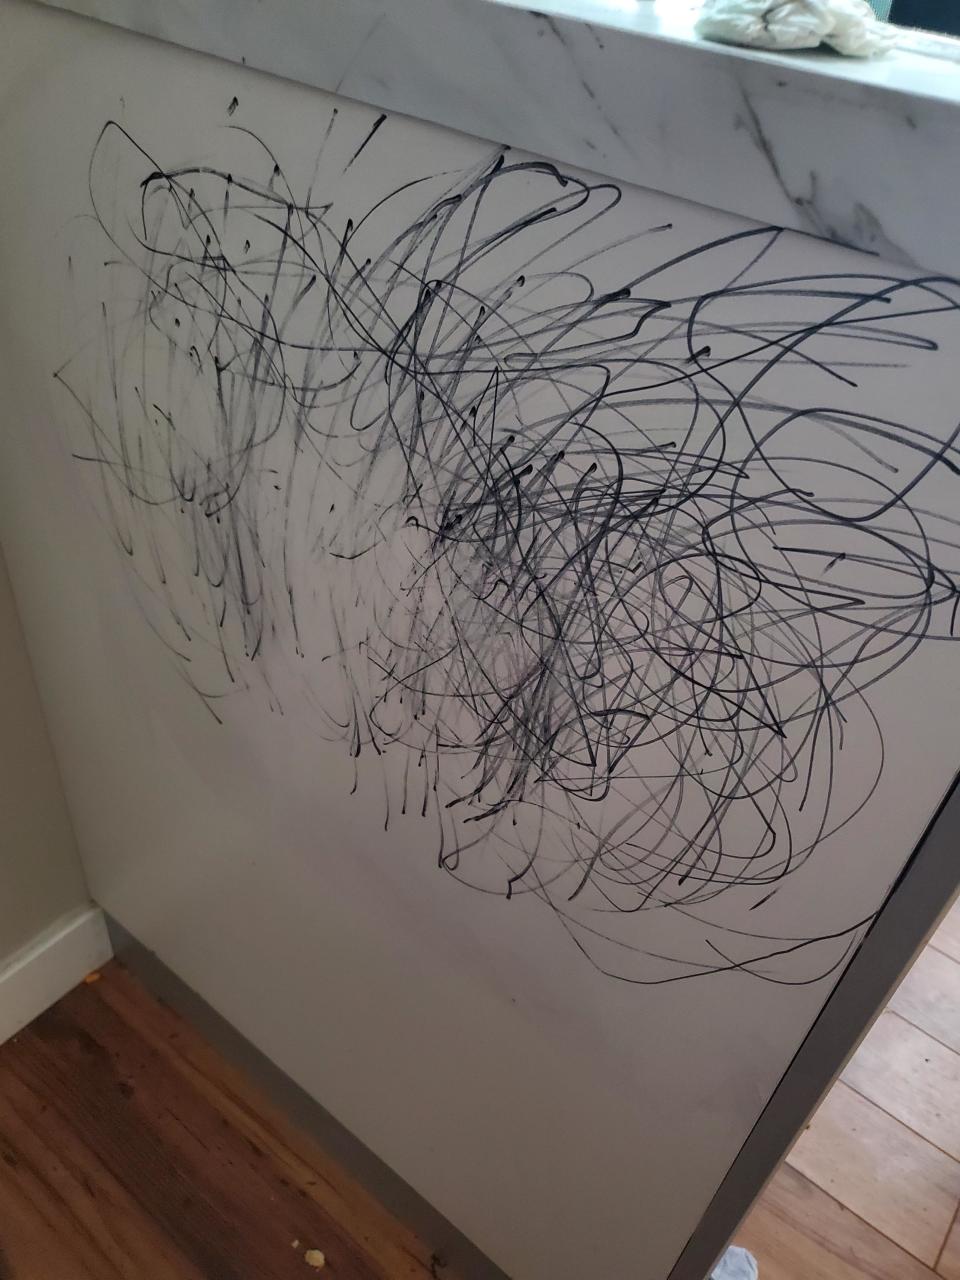 Scratches and scribbles cover a white surface, implying a child's drawing or accidental marks